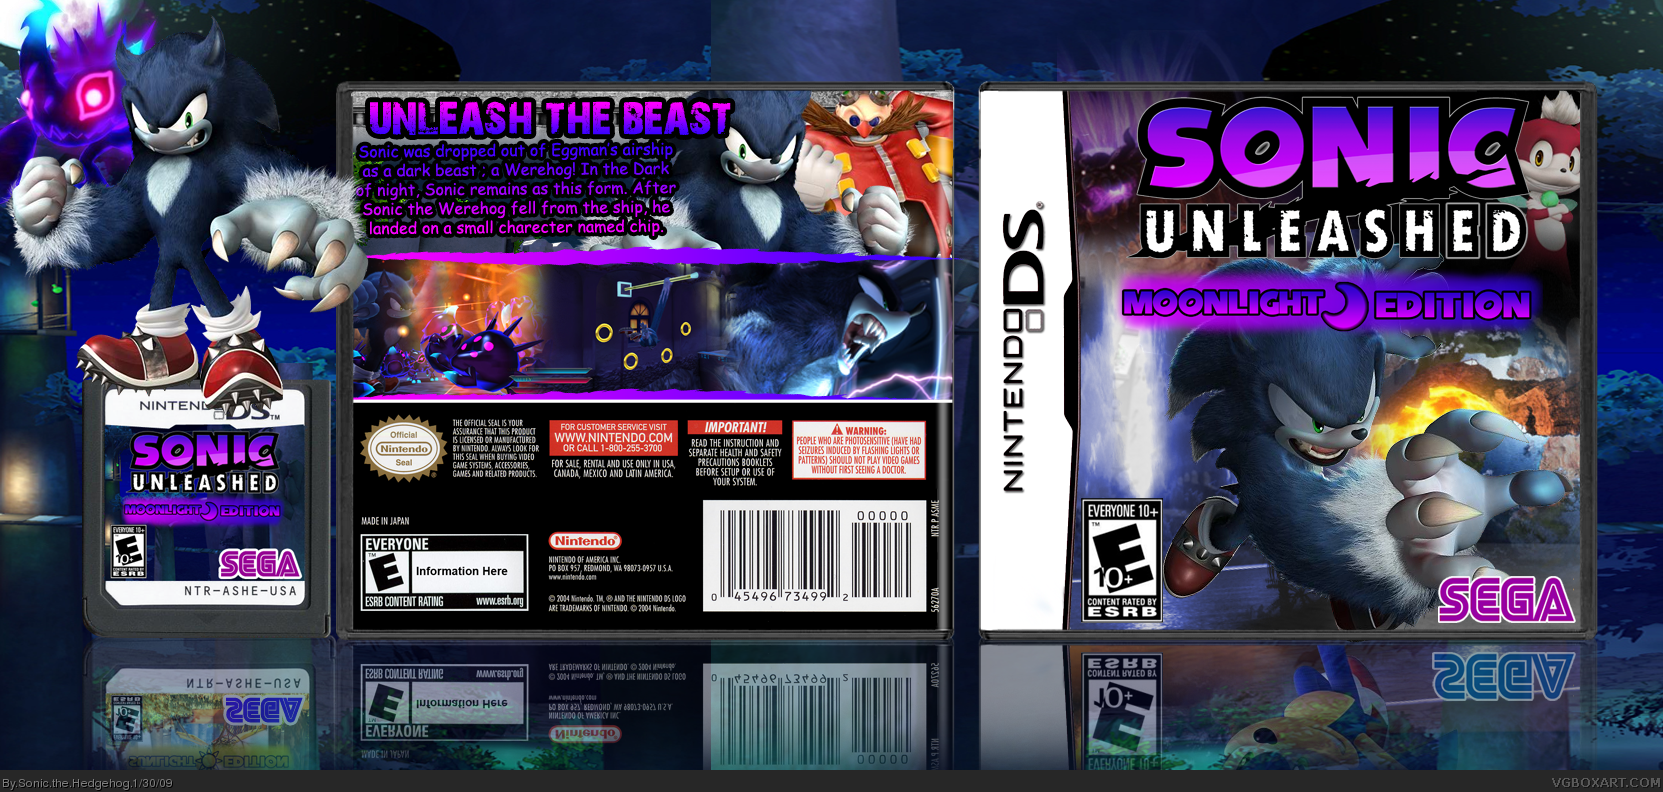 Sonic Unleashed Moonlight Edition box cover